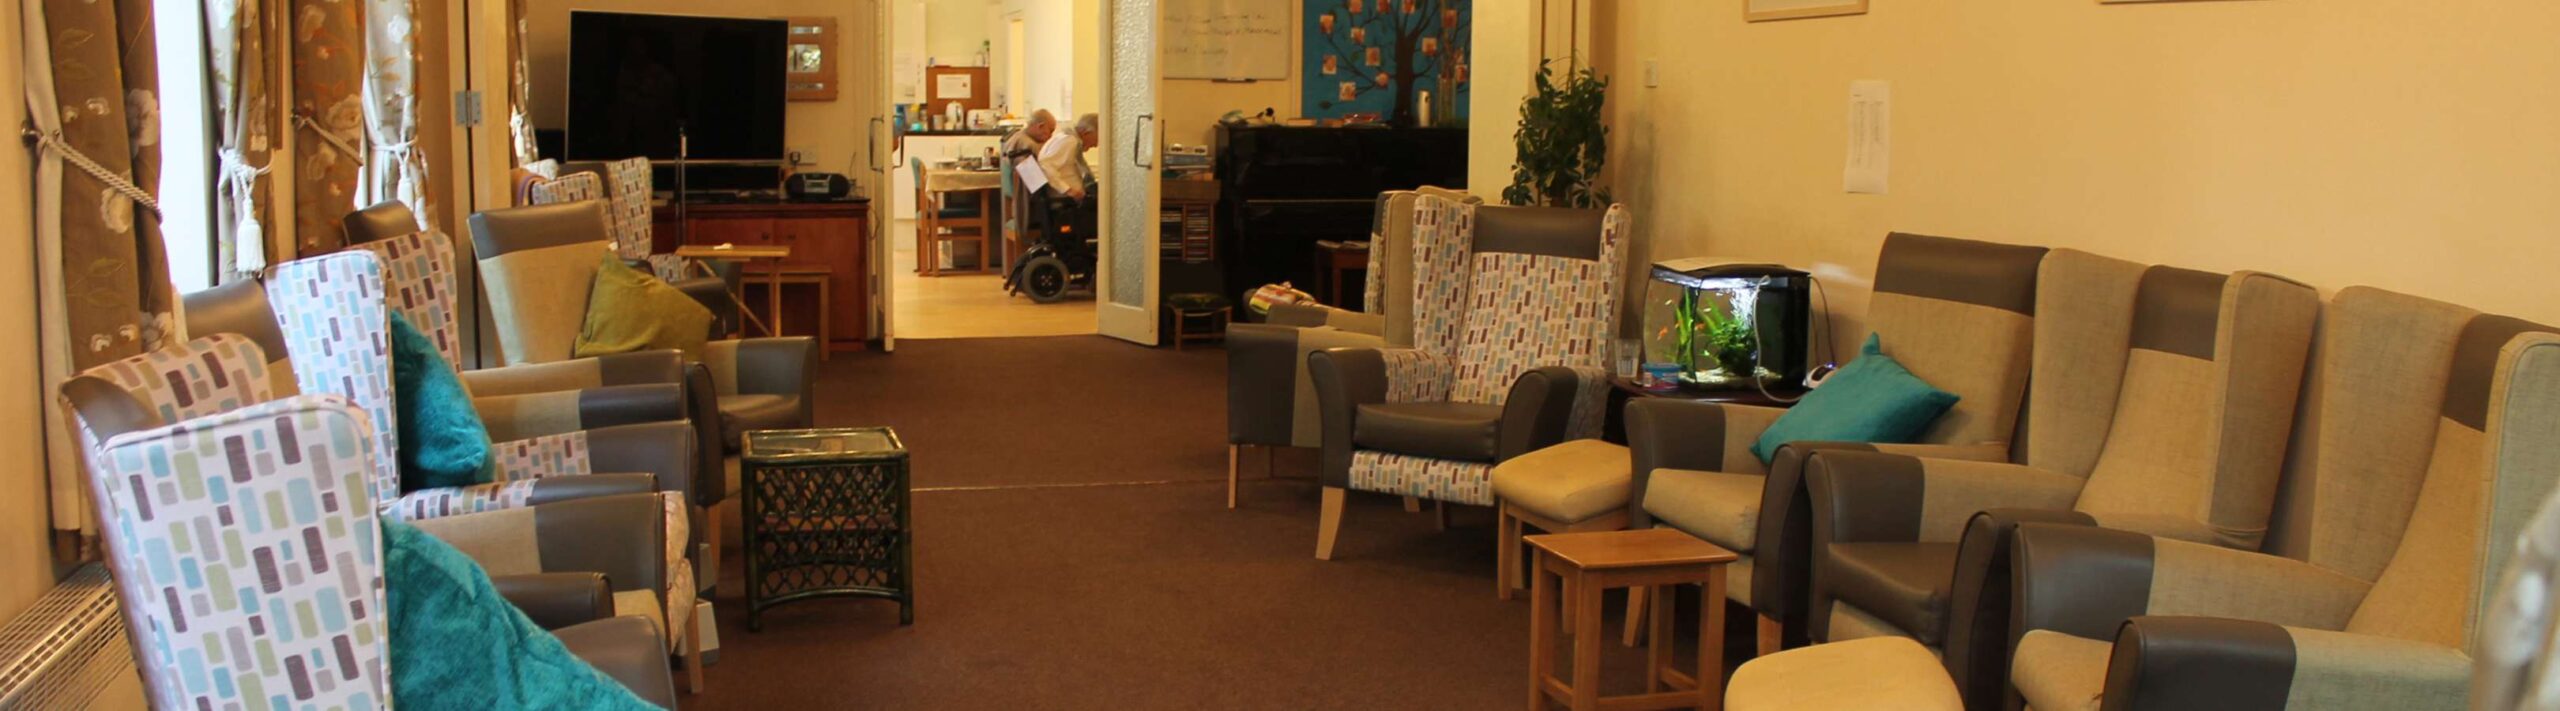 CCH Fairhaven Banner Image showing an inside shot of the communal area